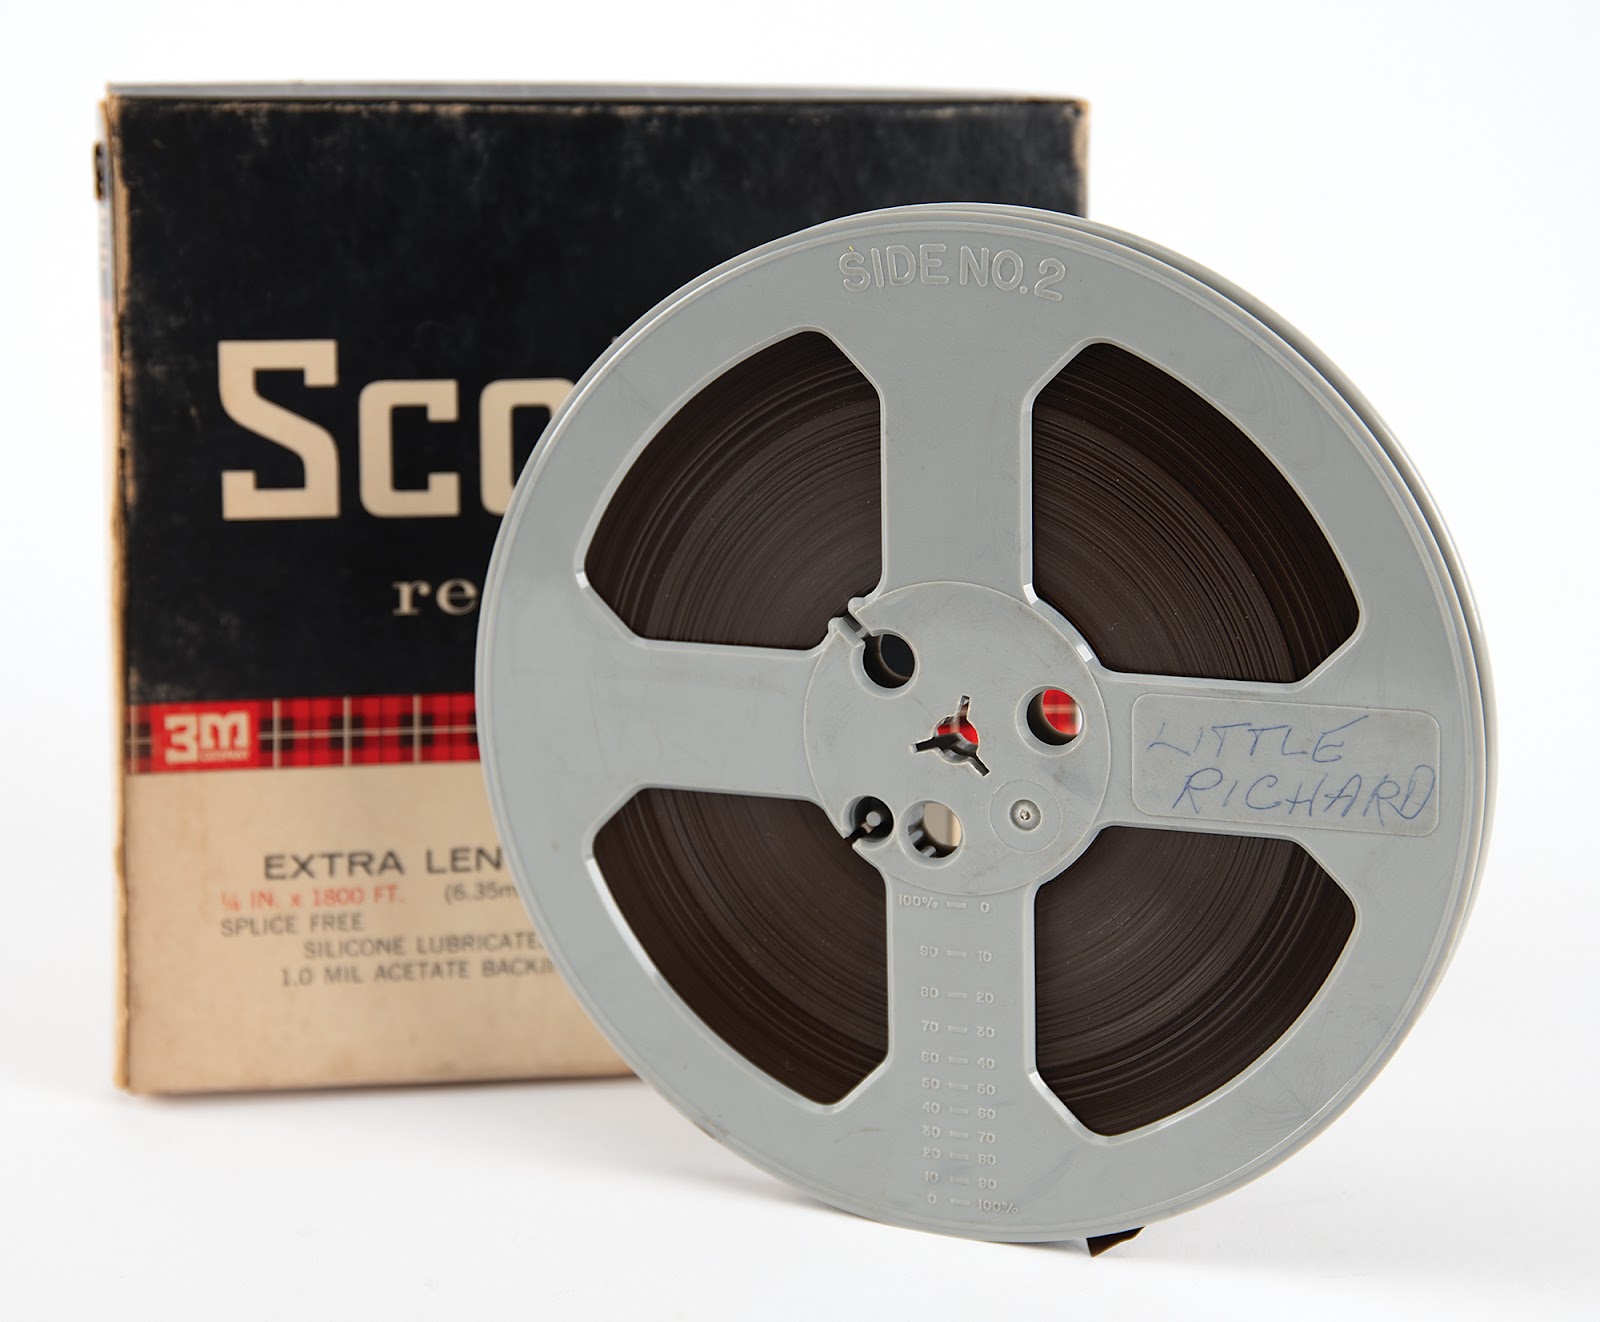 Original tape of Little Richard’s performance in Boston, complete with its original box.